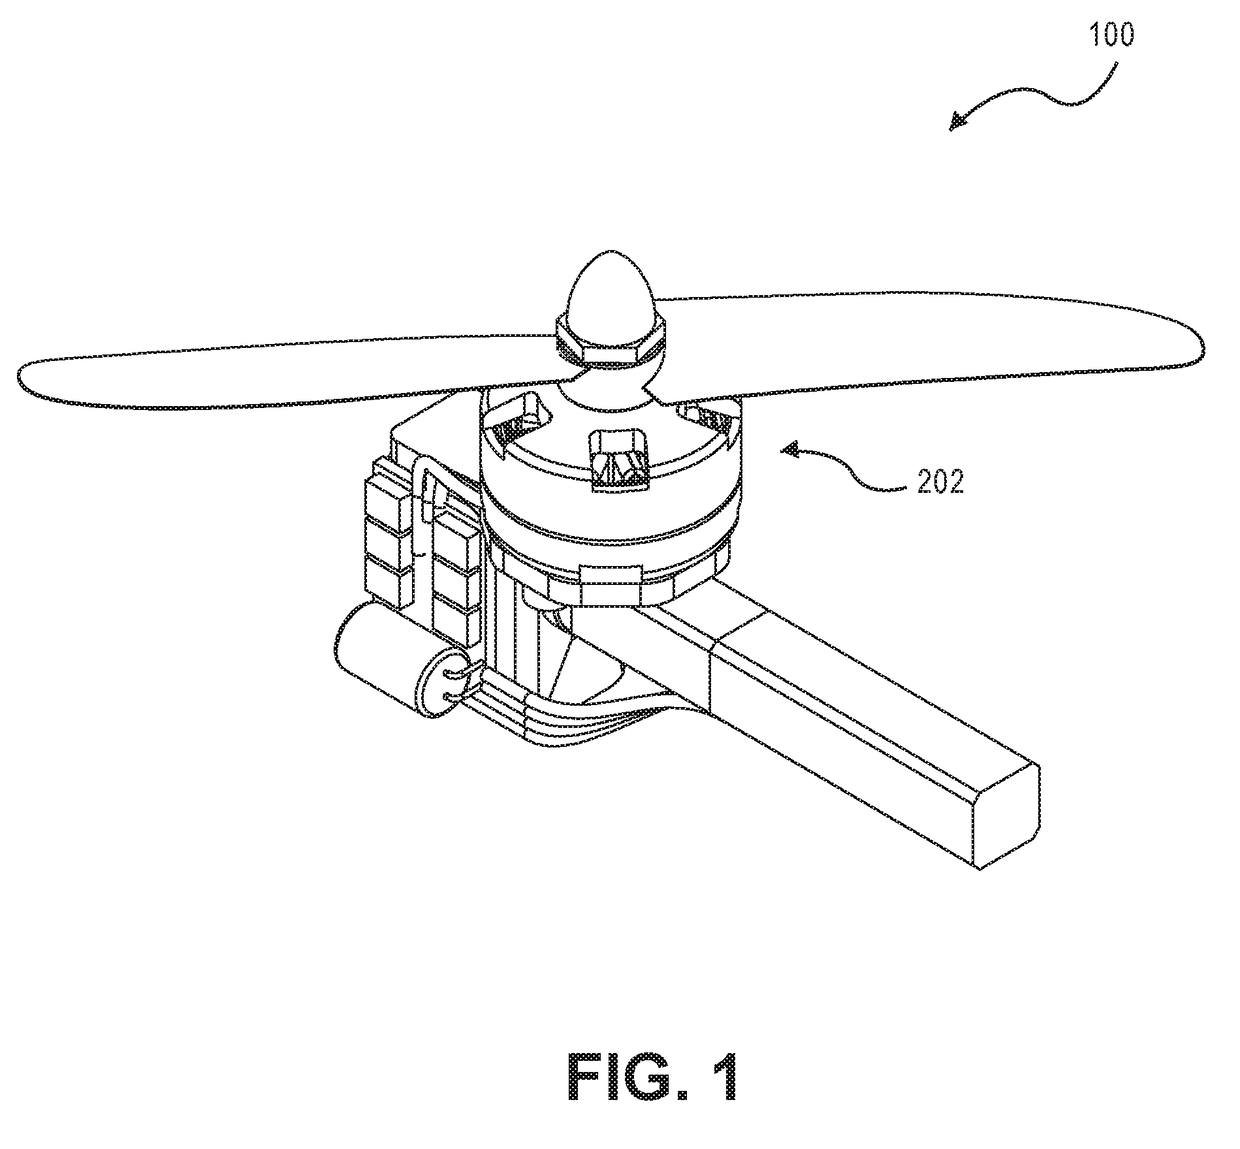 Gimbaled thruster configuration for use with unmanned aerial vehicle